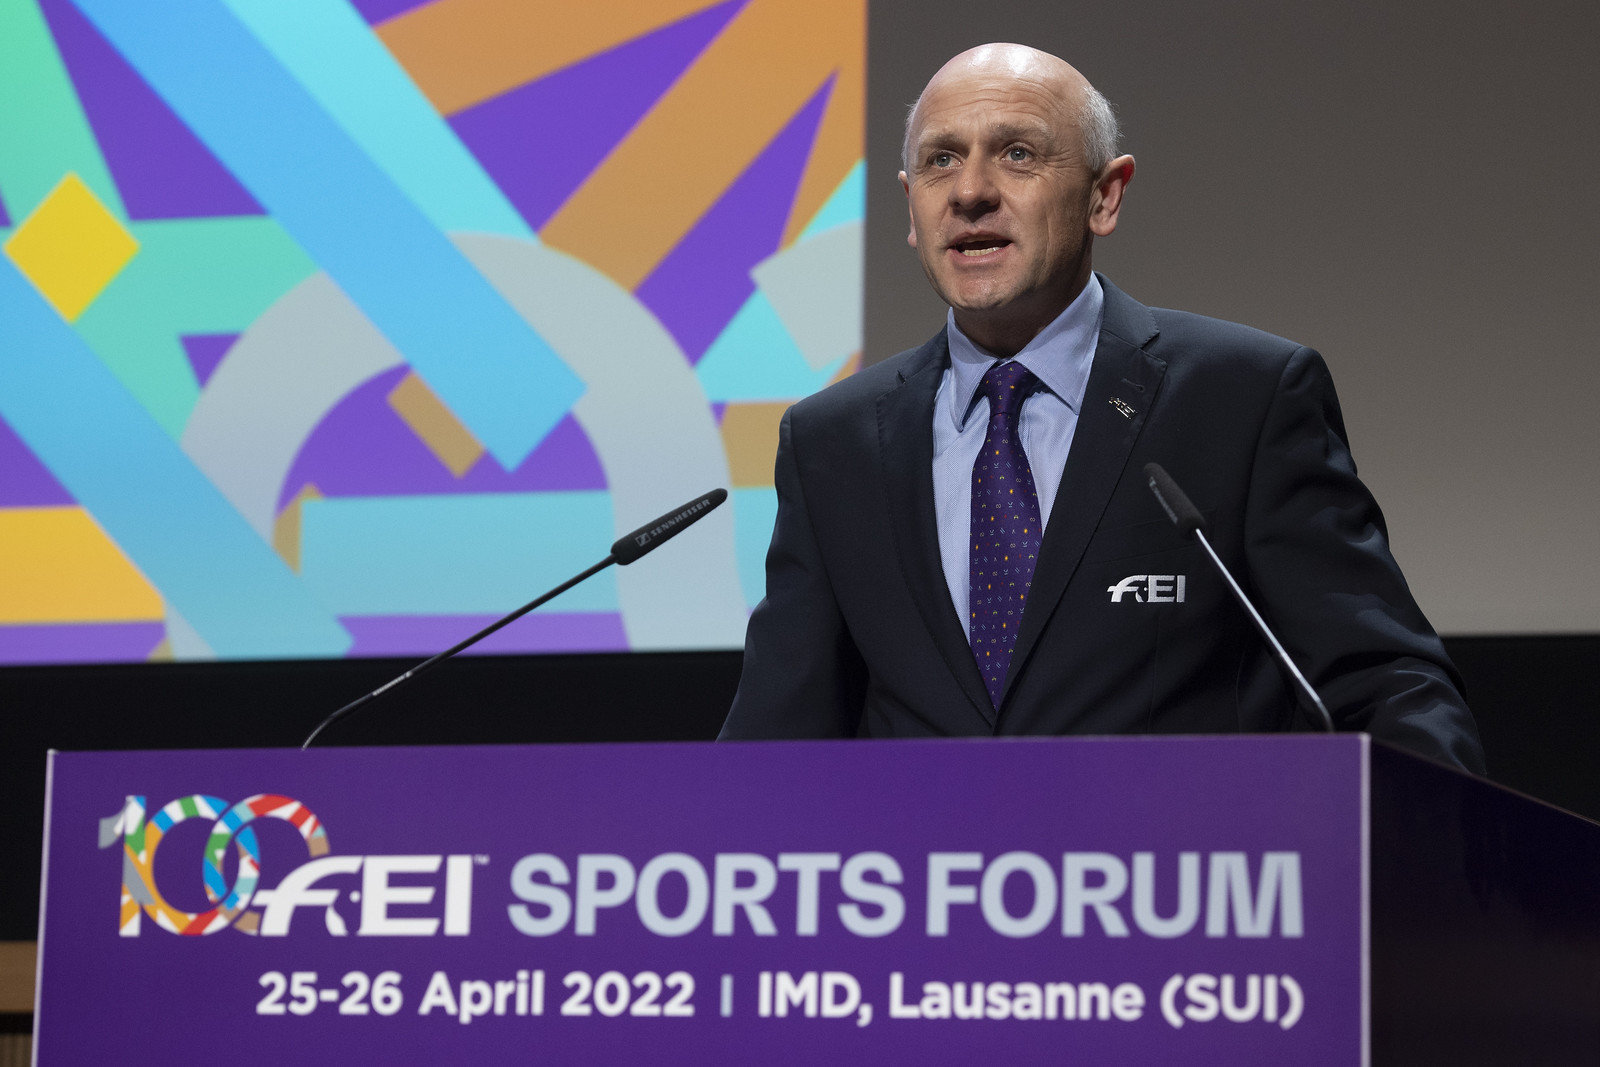 The FEI recognised the International Grooms Association on day two of the Sports Forum ©FEI